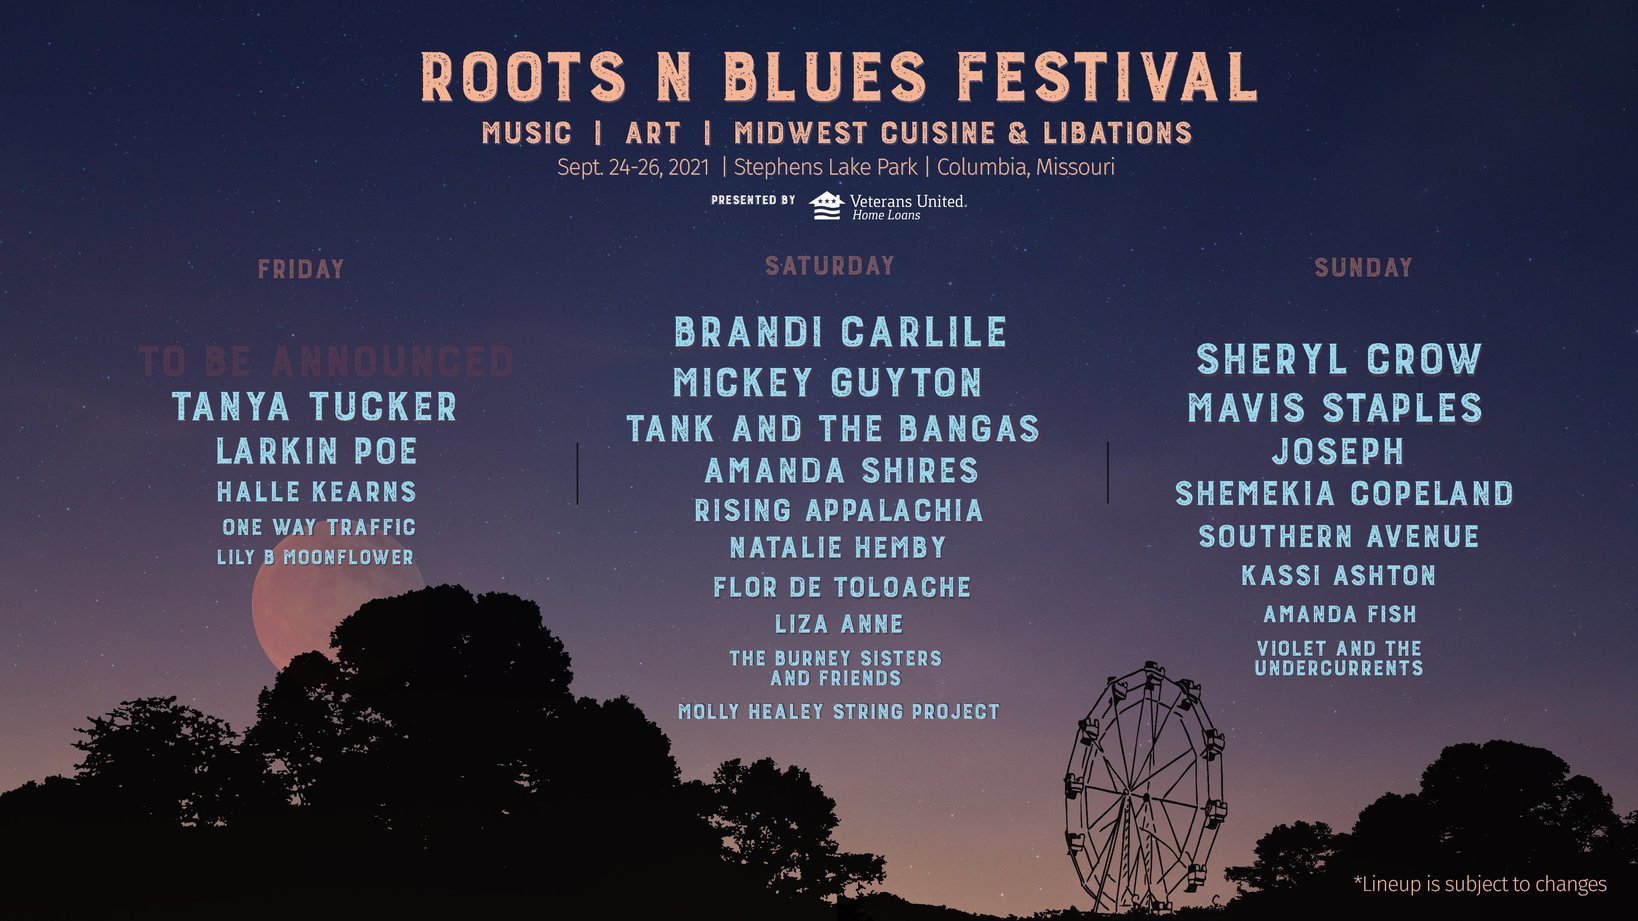 How To Find The Cheapest Roots N Blues Festival Tickets & Passes + 2021